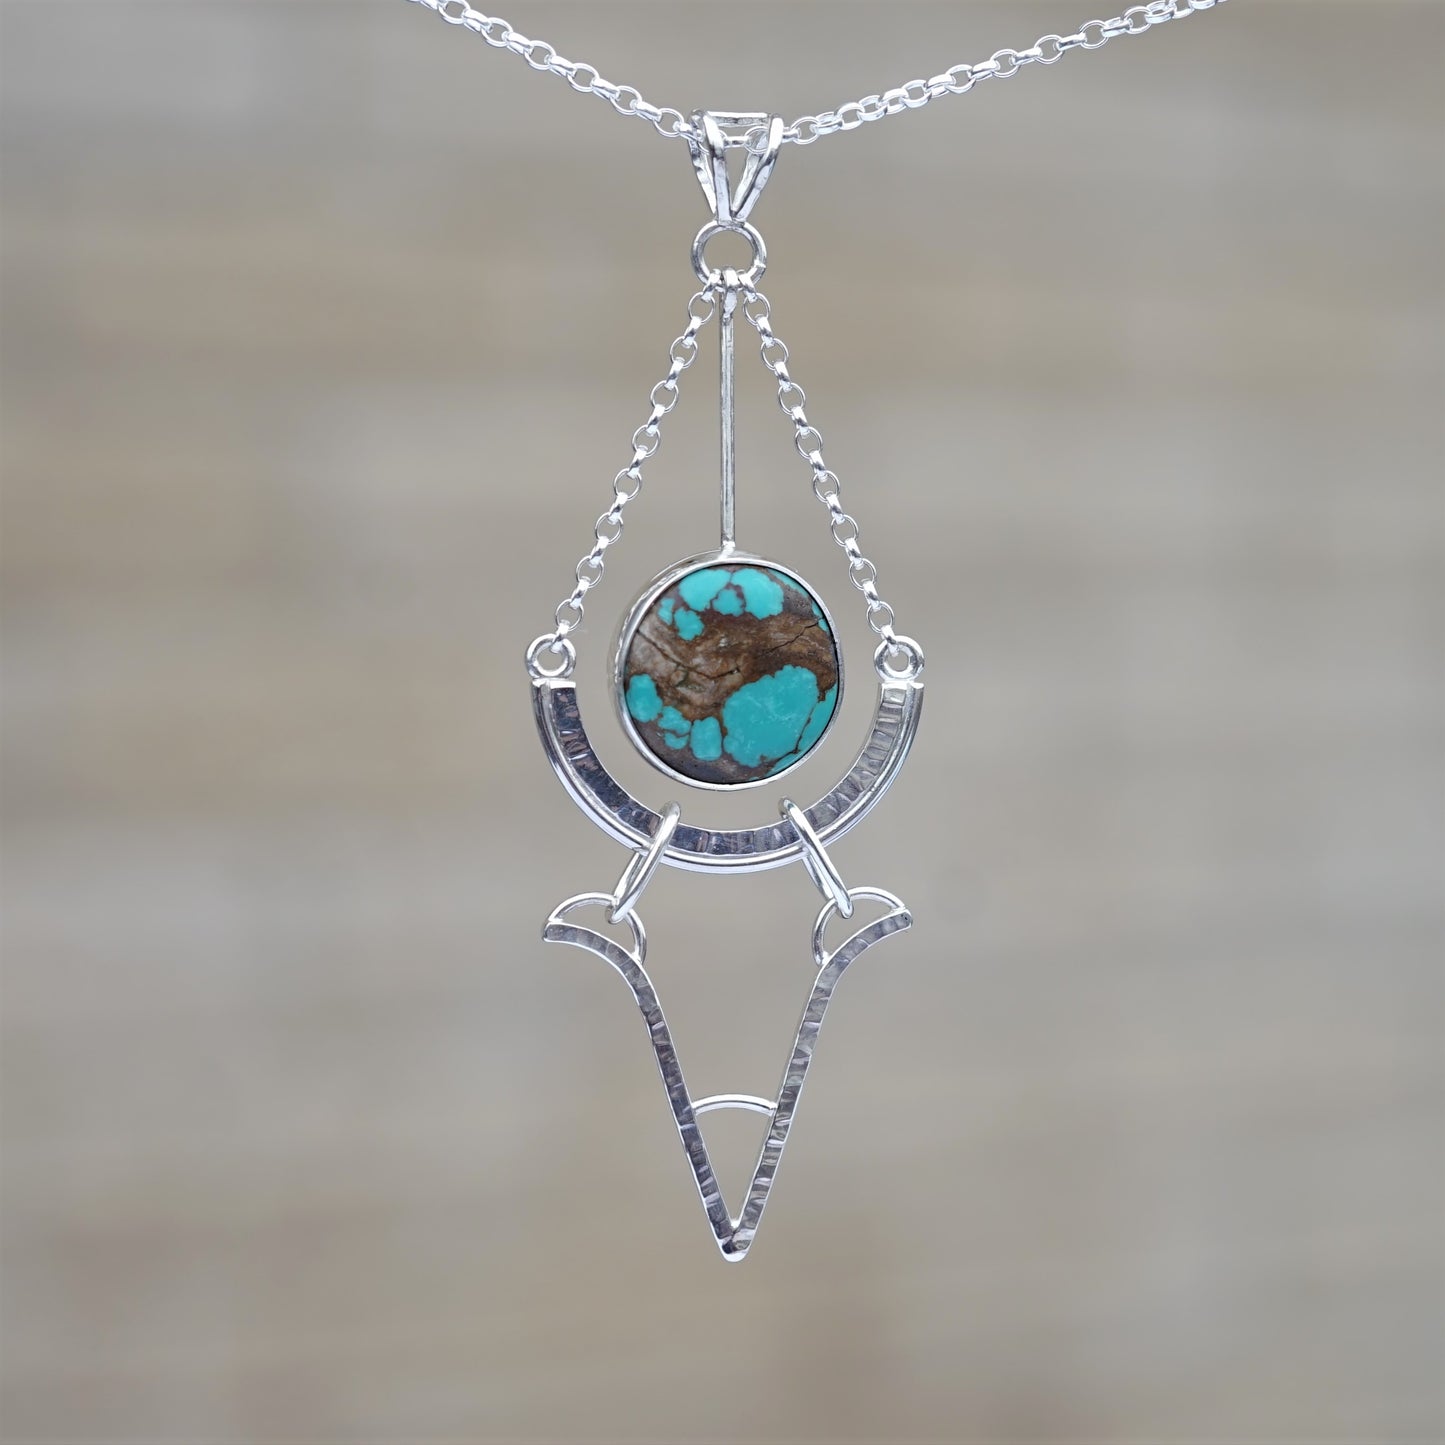 Tibetan Turquoise and 925 Sterling Silver Pendant (B)